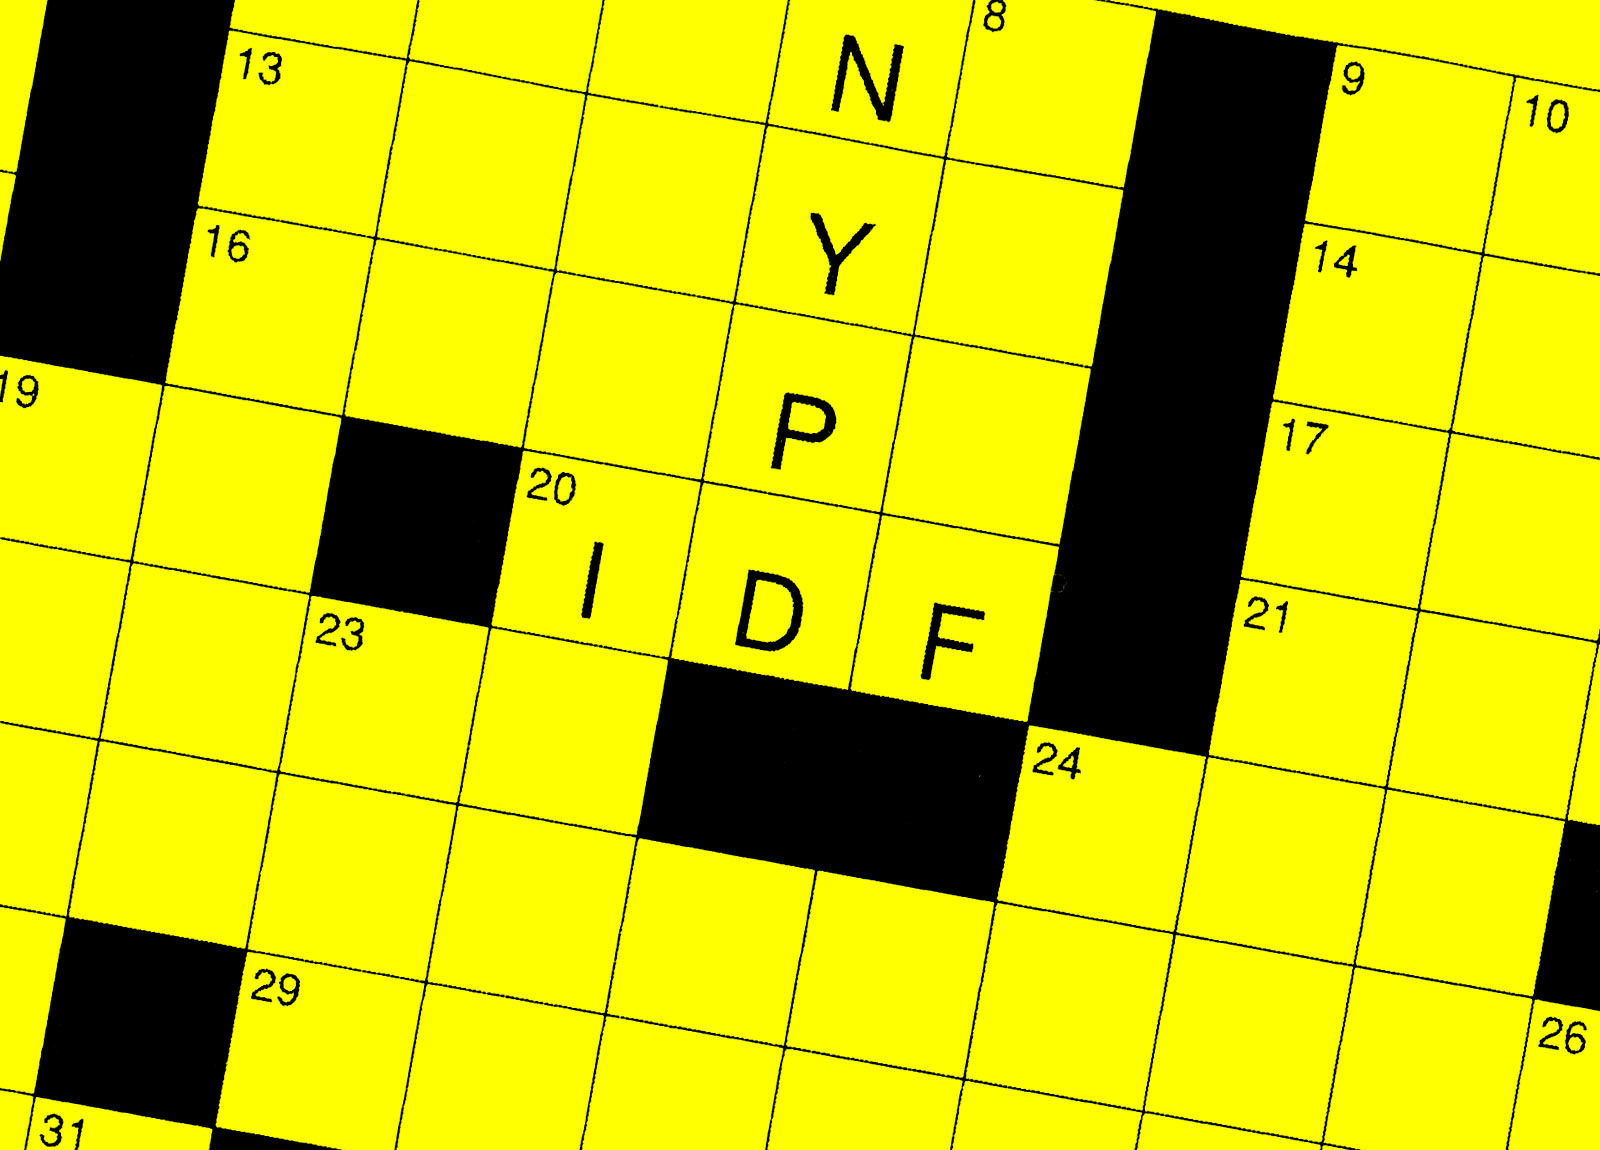 https://newyorkwarcrimes.com/media/pages/crossword-puzzle-may-9-2024/f362b36e46-1714943143/nywc-crossword-20240509.jpg